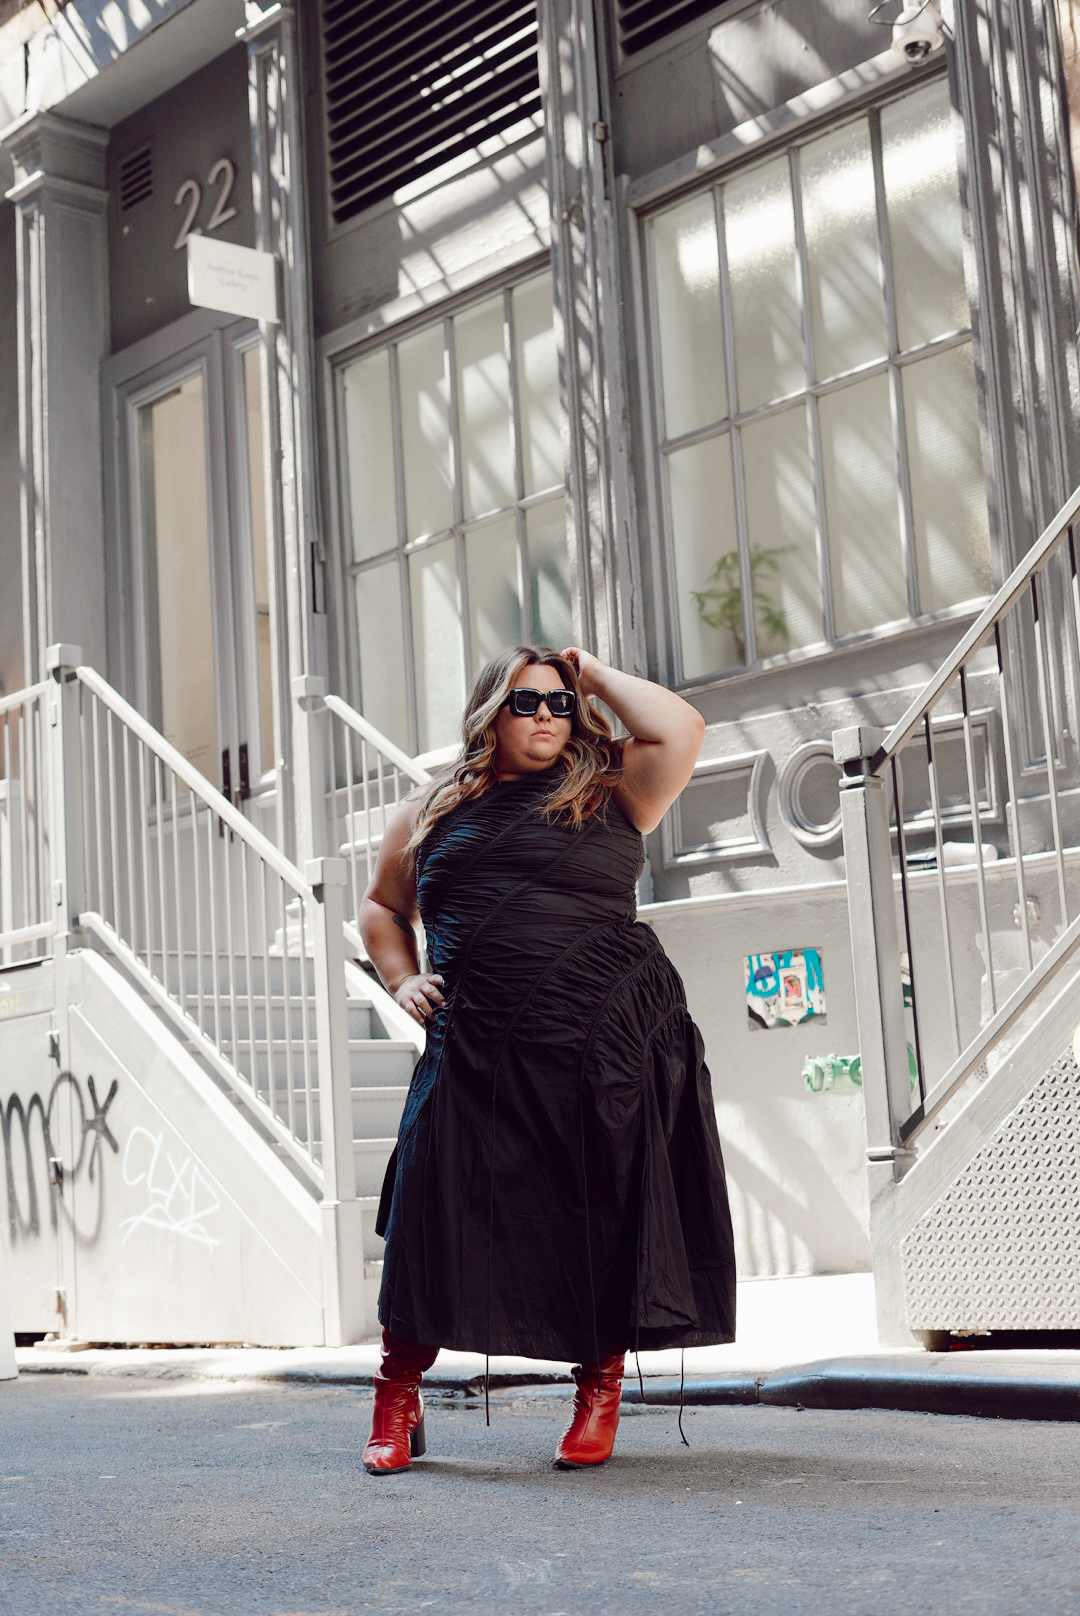 Plus size fashion blogger Natalie in the City shares her NYFW plus size outfits SS'24 that she wore during New York Fashion Week.